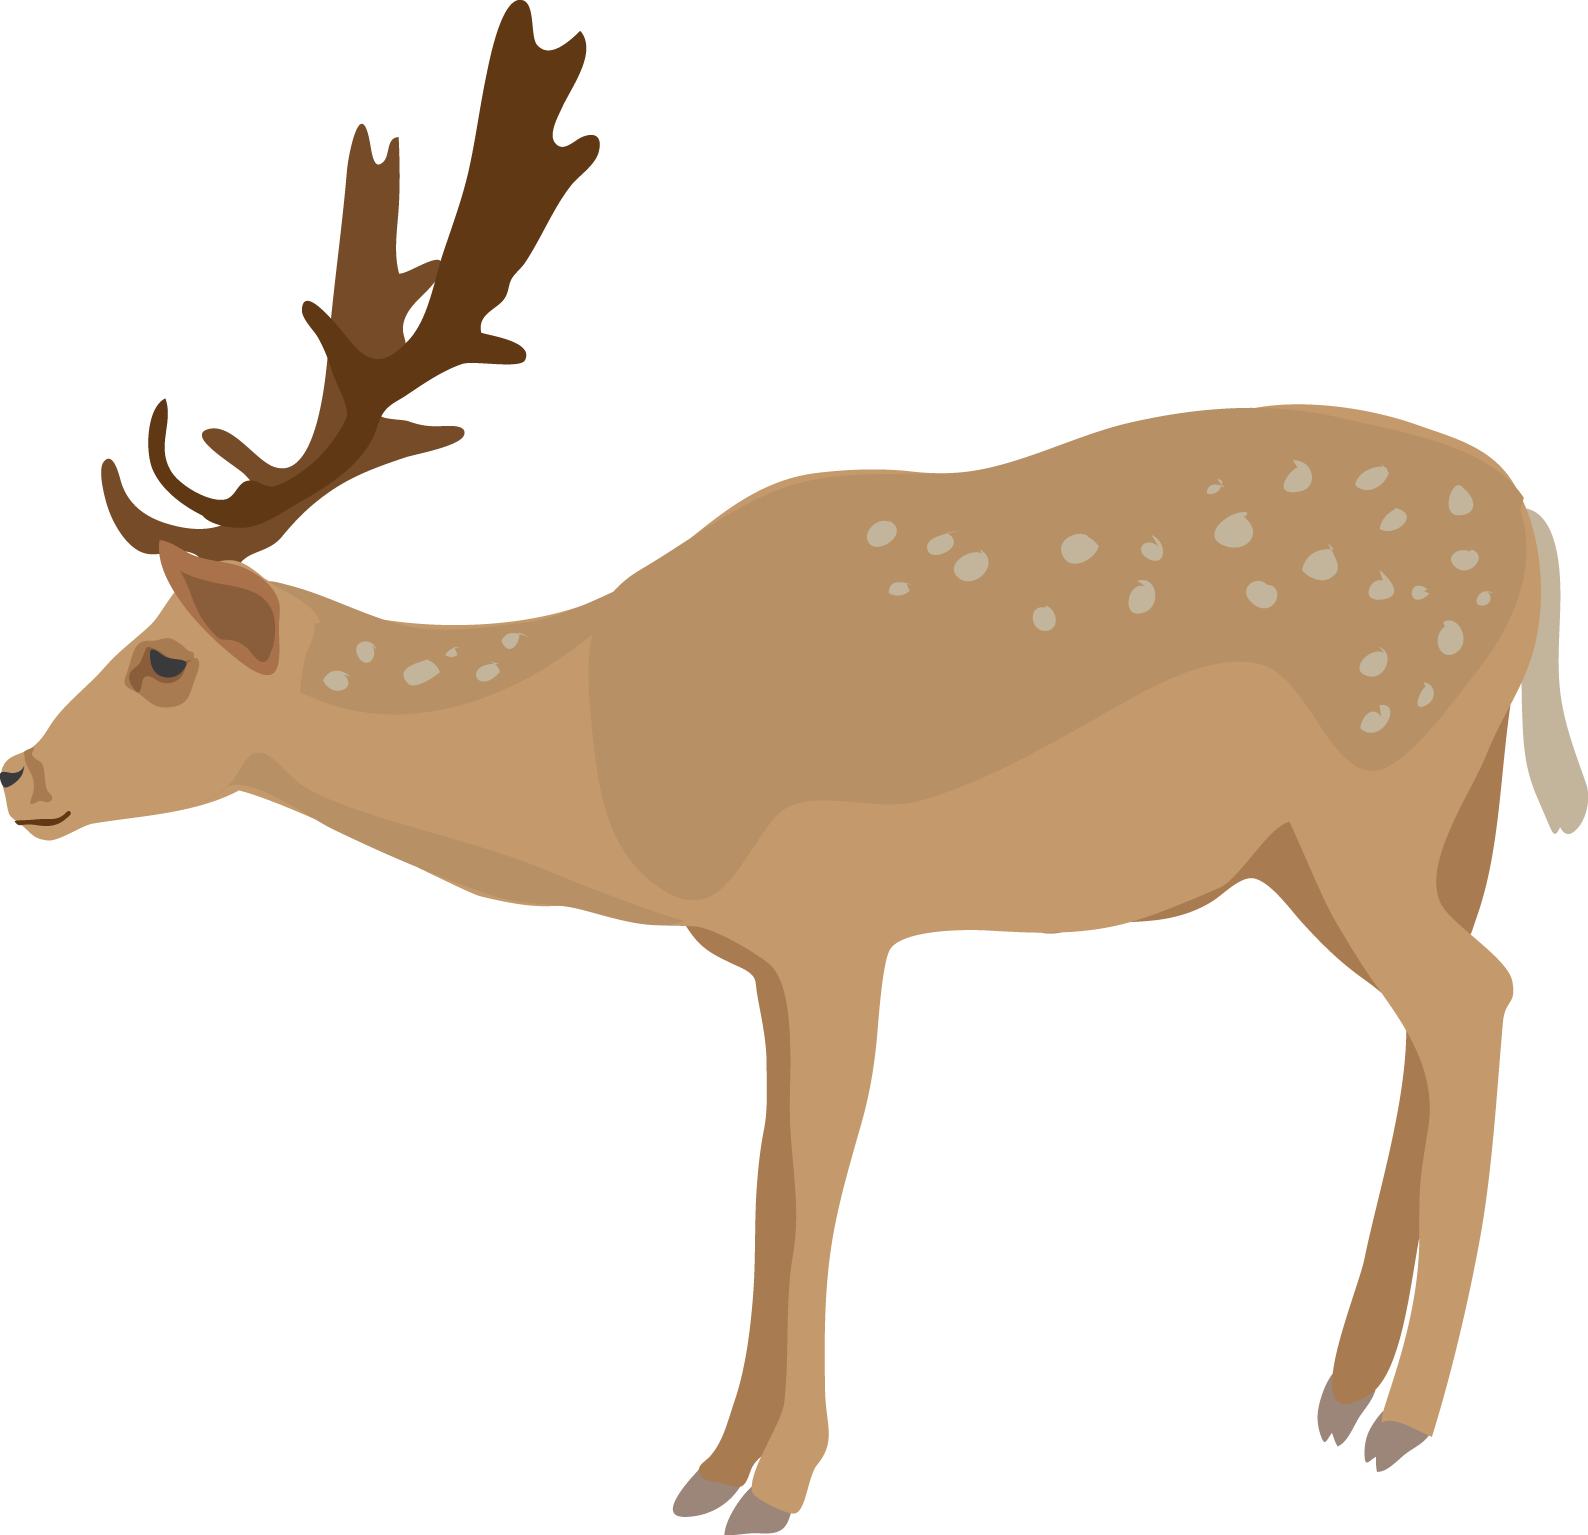 Cute deer clipart free clipart images 2